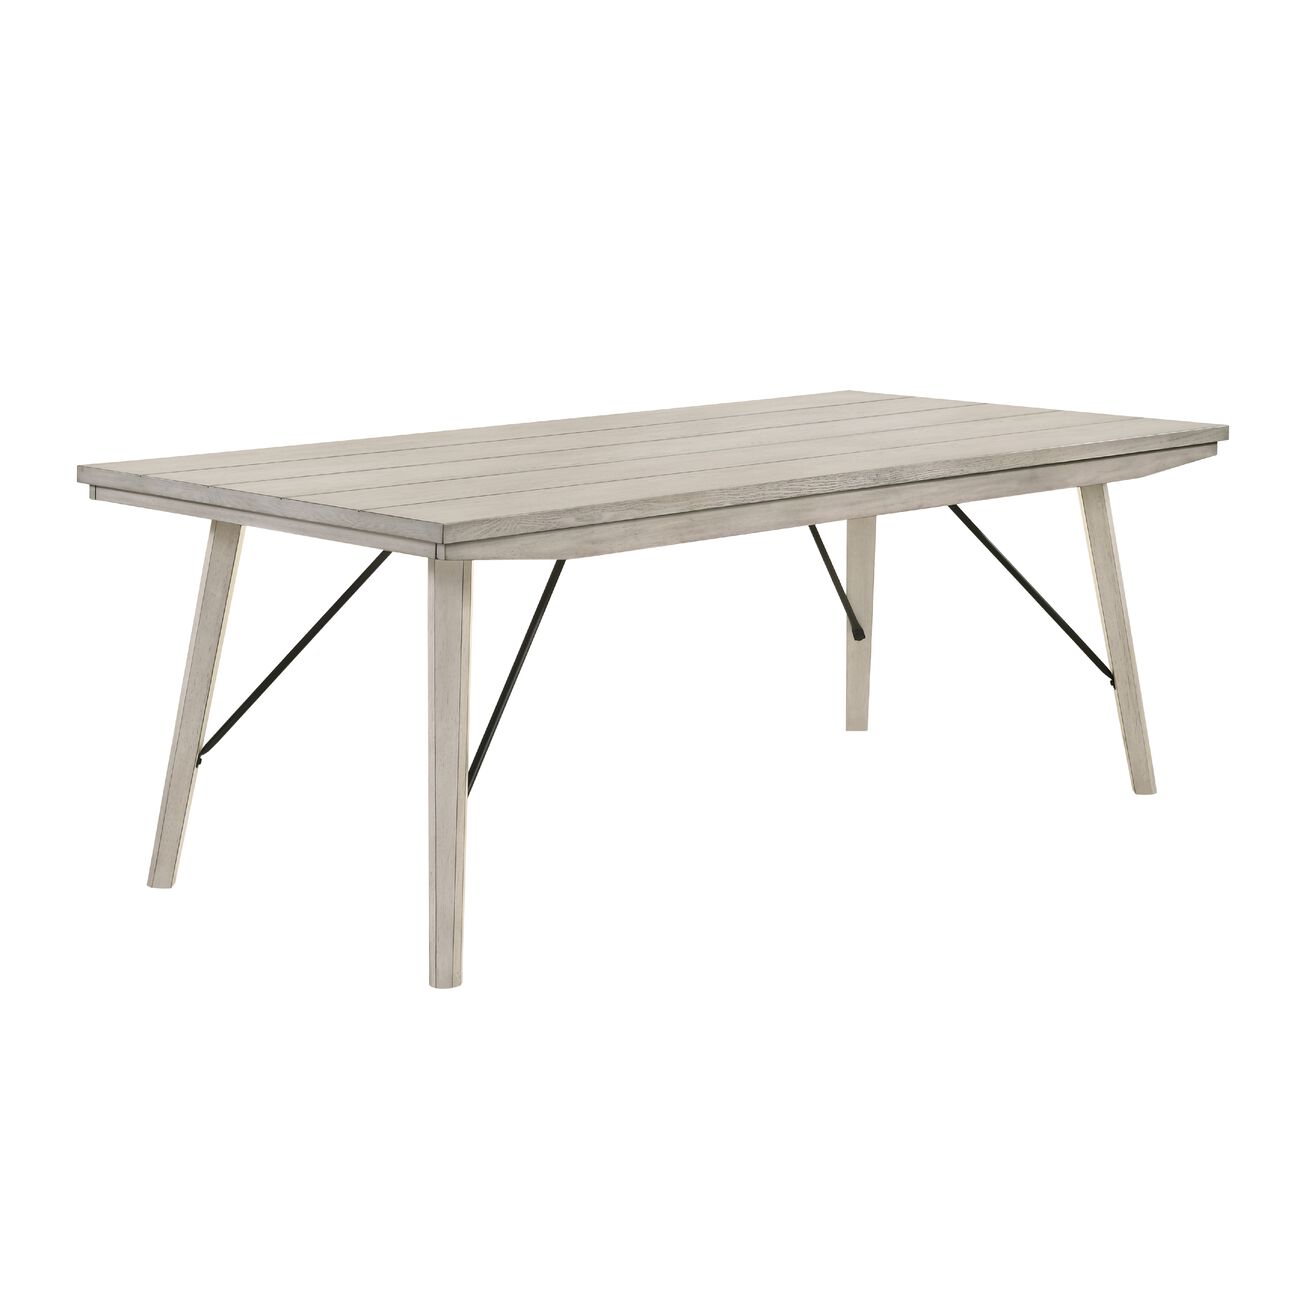 Plank Top Rectangular Dining Table with Braces Support, Antique White - BM215273